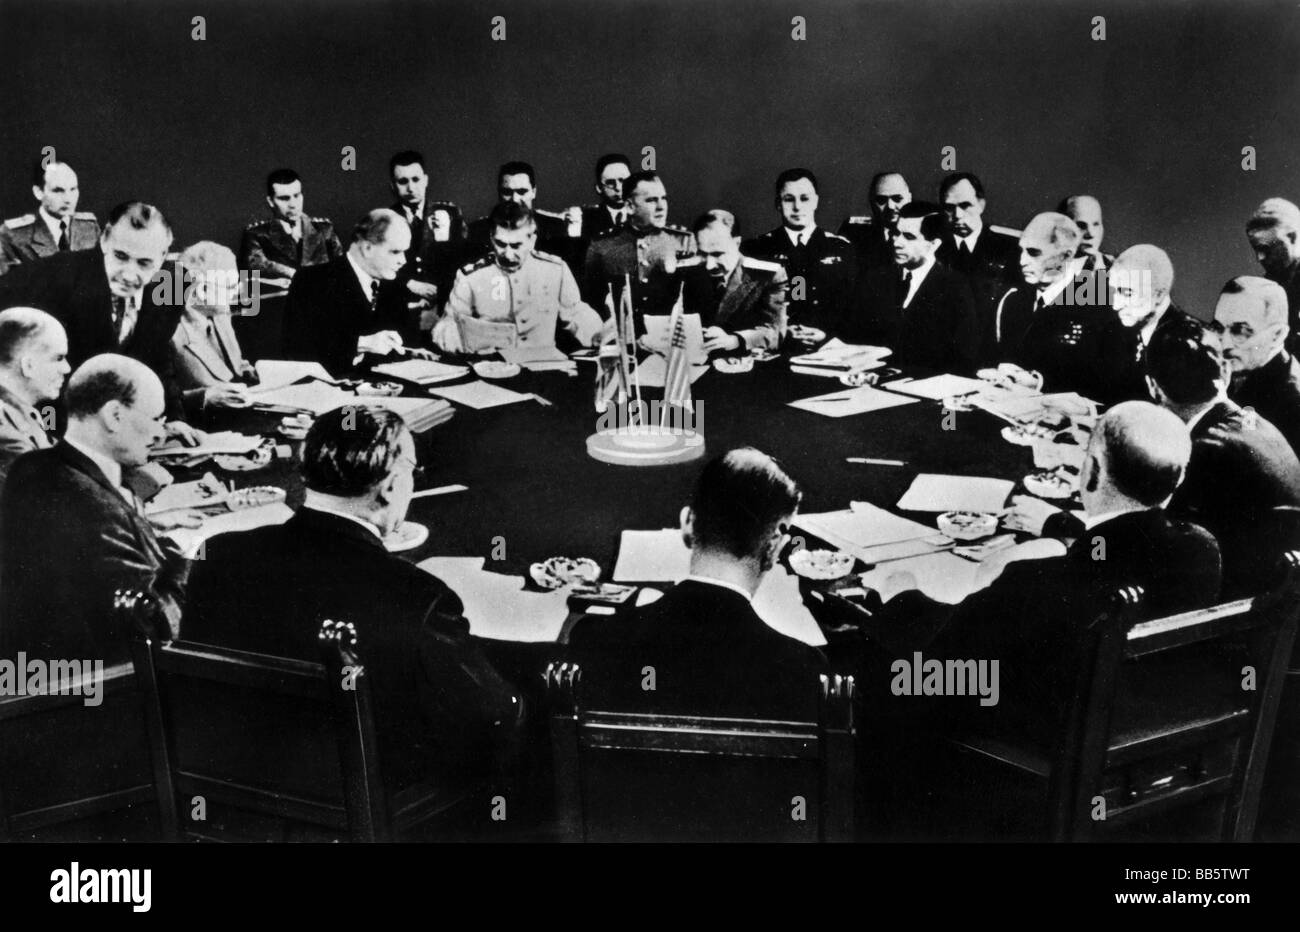 events, Second World War / WWII, conferences, Potsdam Conference 17.7.1945 - 2.8.1945, Clement Attlee, Joseph Stalin and Harry S. Truman with their delegations during the negotiations, Stock Photo